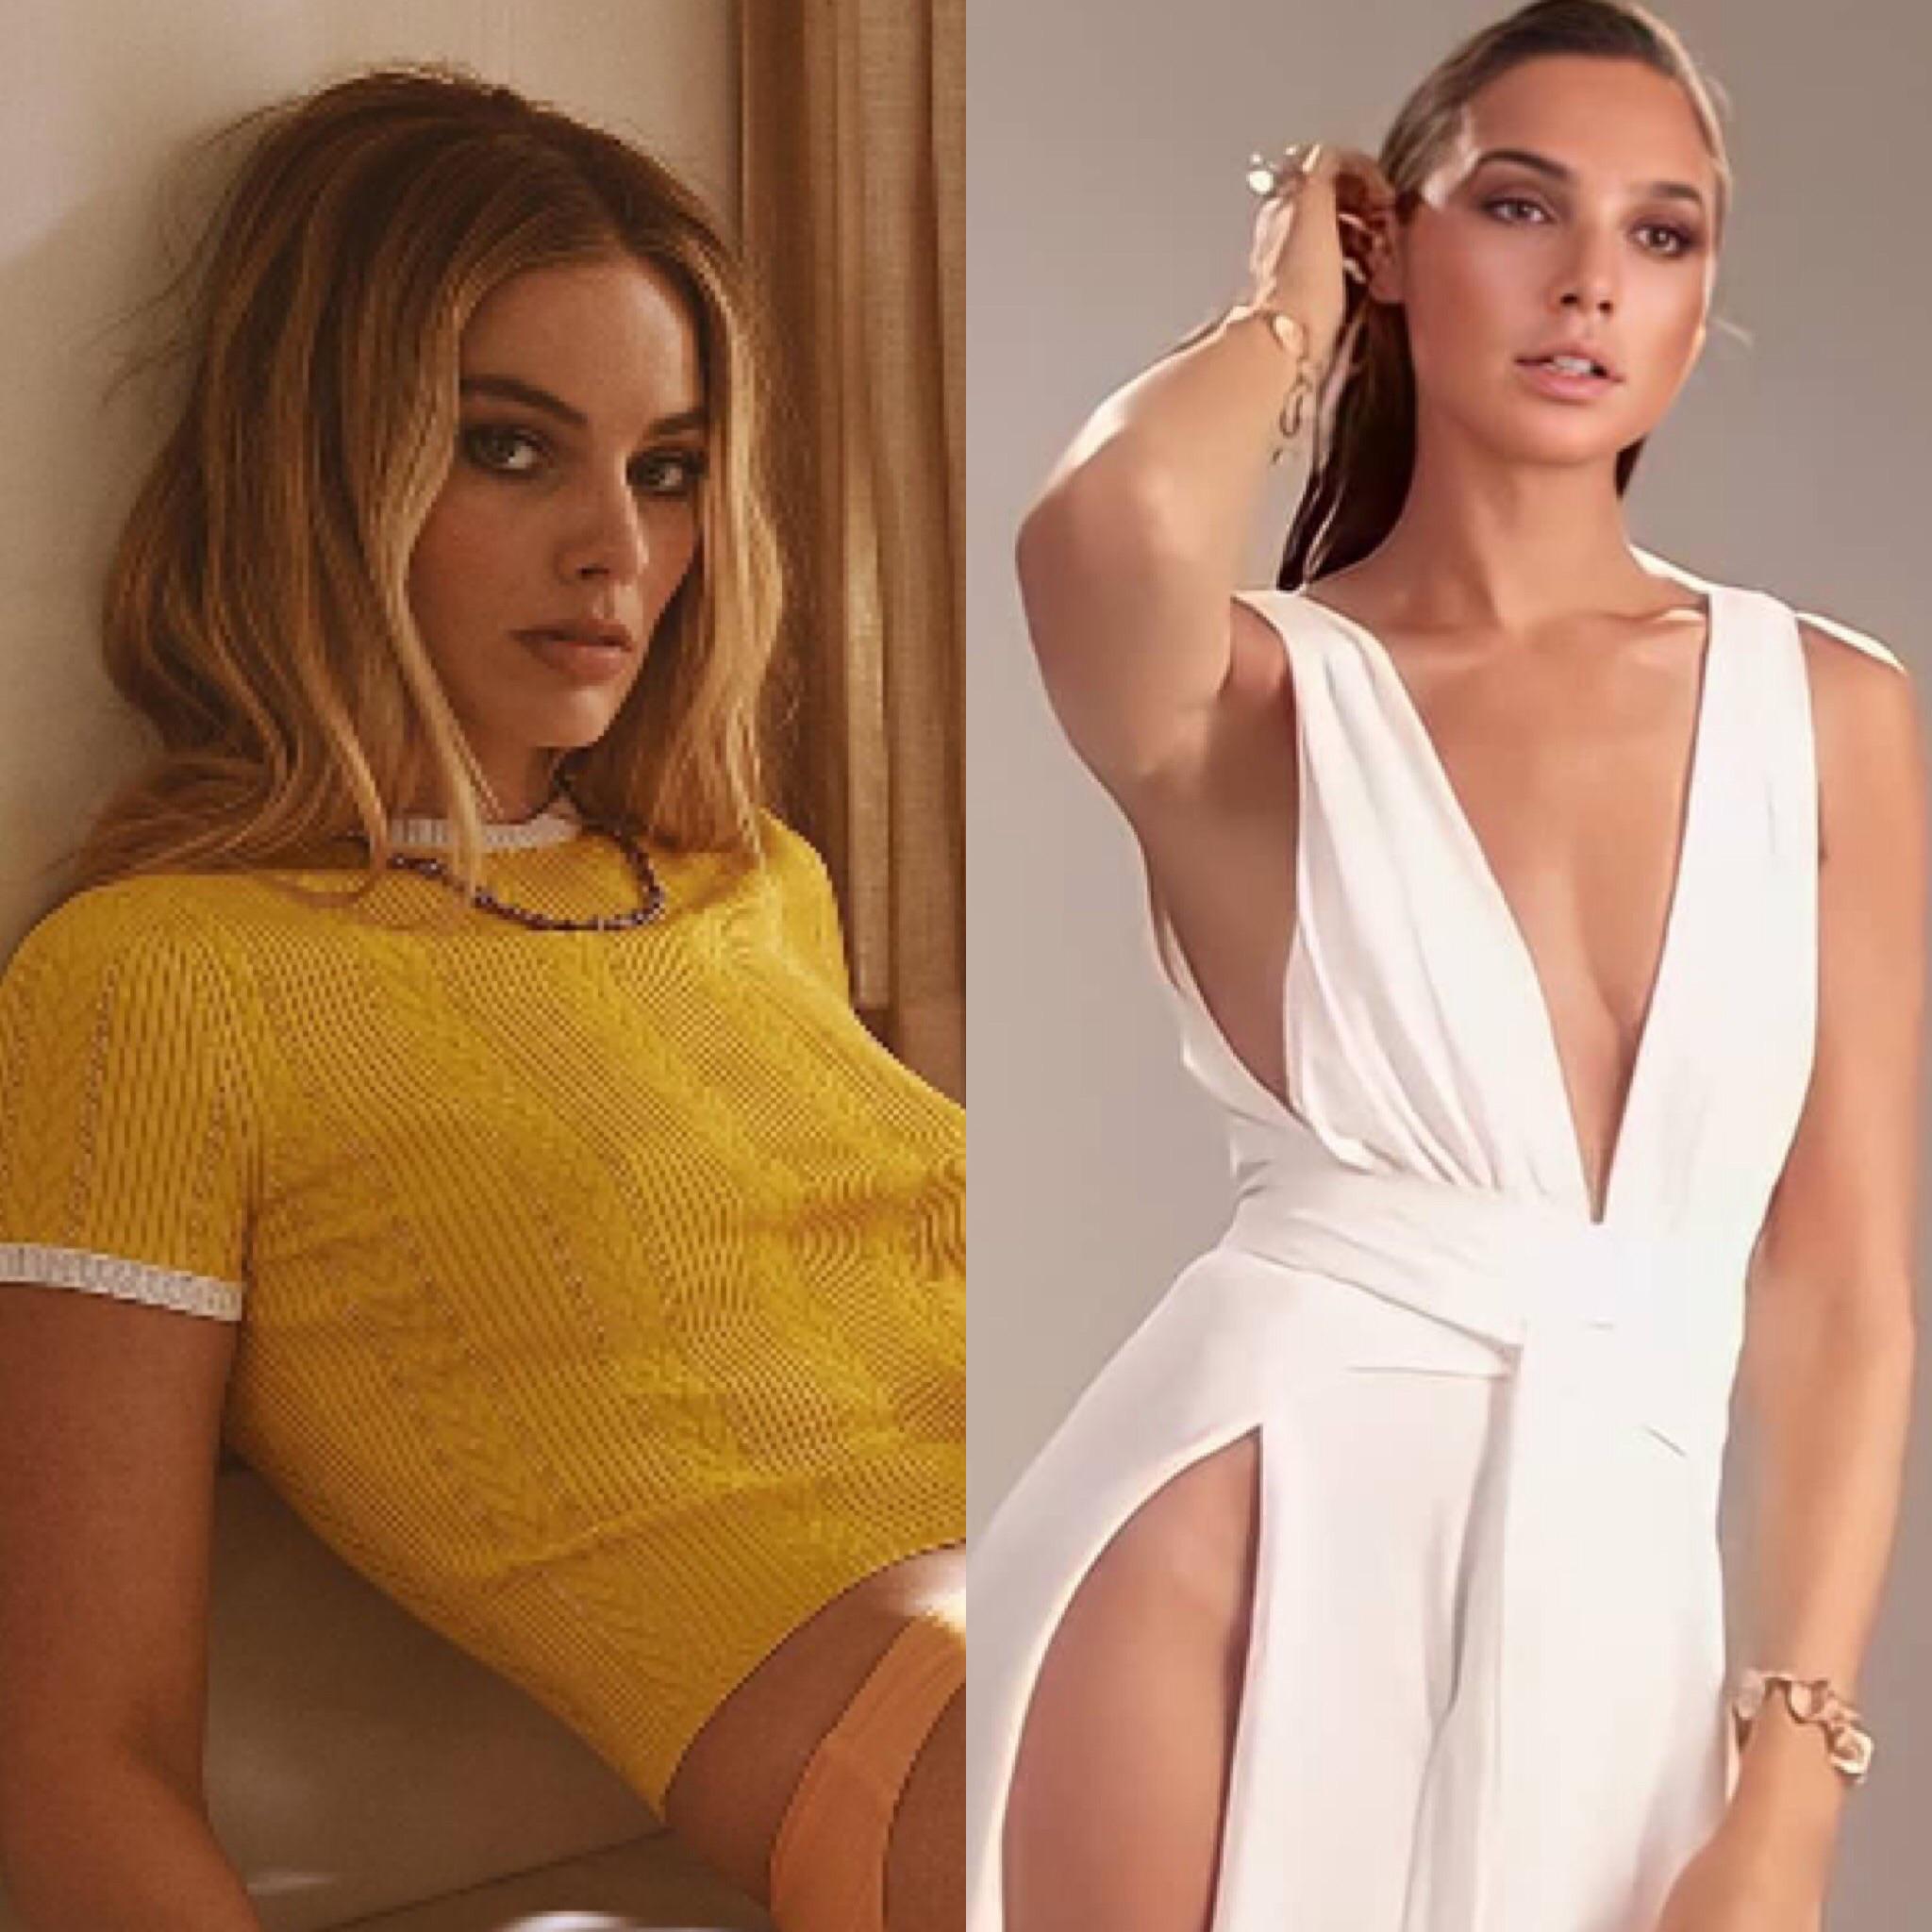 Who would give the better blowjob Margot Robbie or Gal